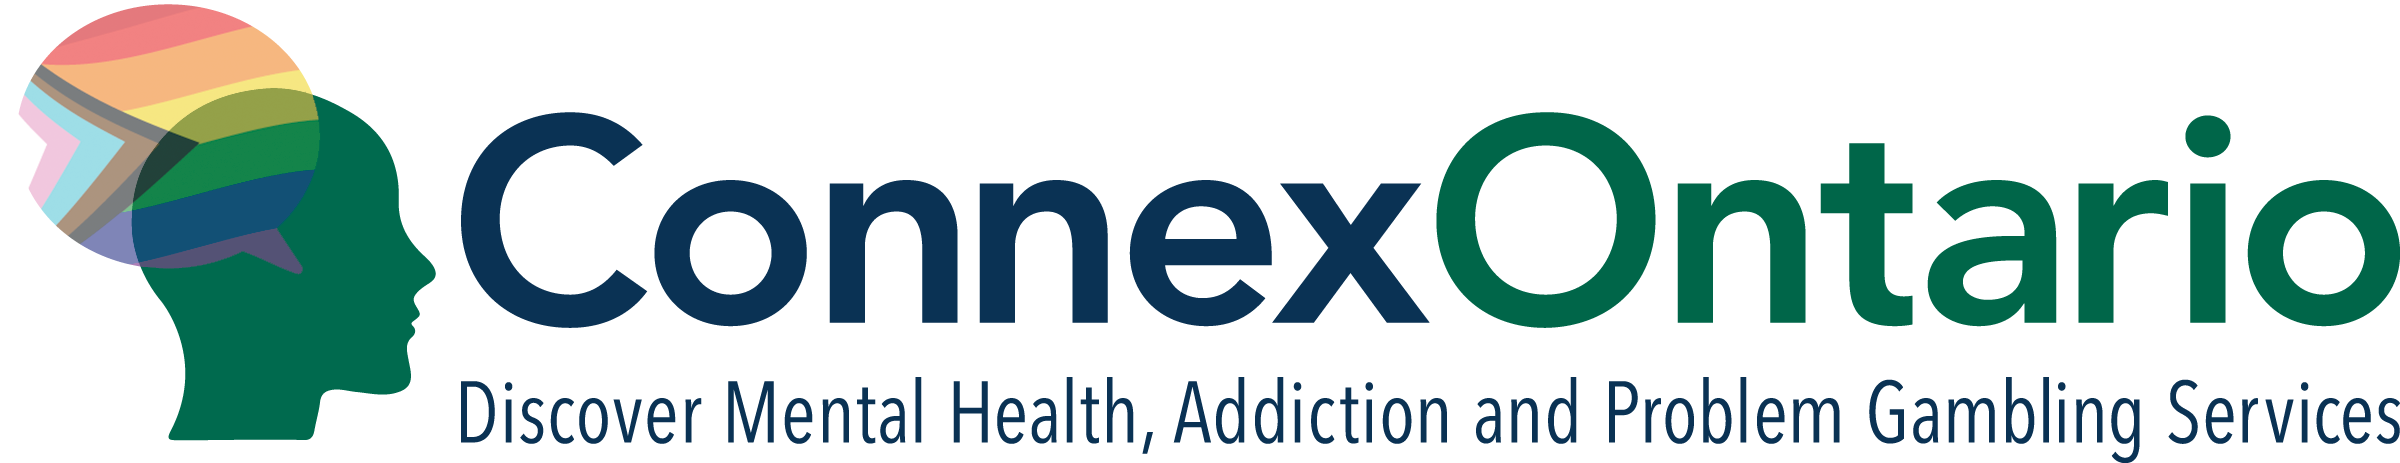 ConnexOntario provides free and confidential health services information for people experiencing problems with alcohol and drugs, mental illness or gambling by connecting them with services in their area.